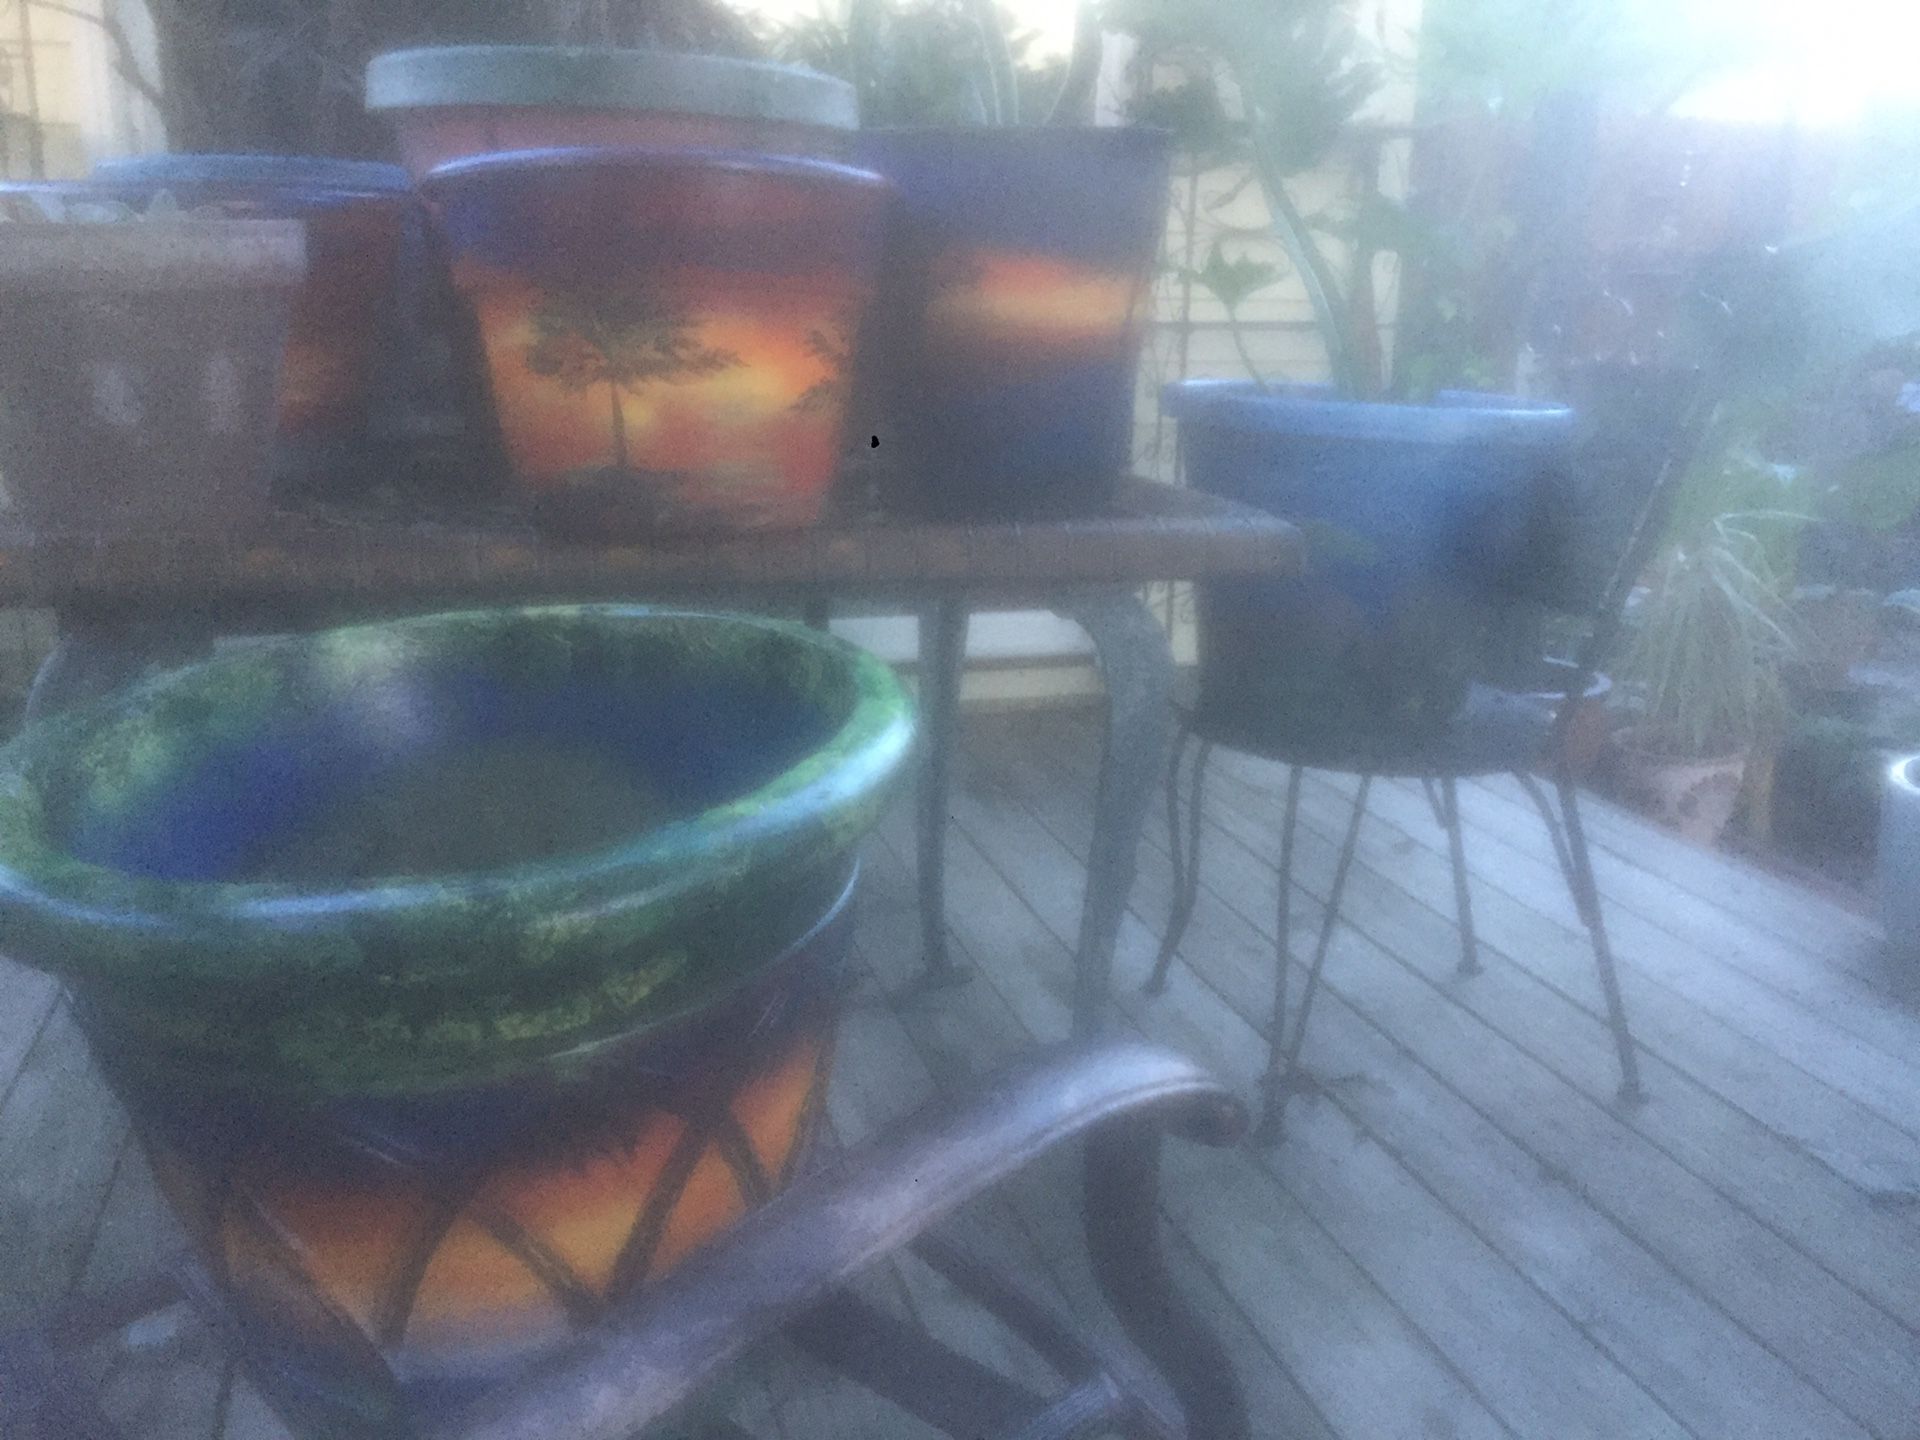 Custom painted flower pots plants available as well